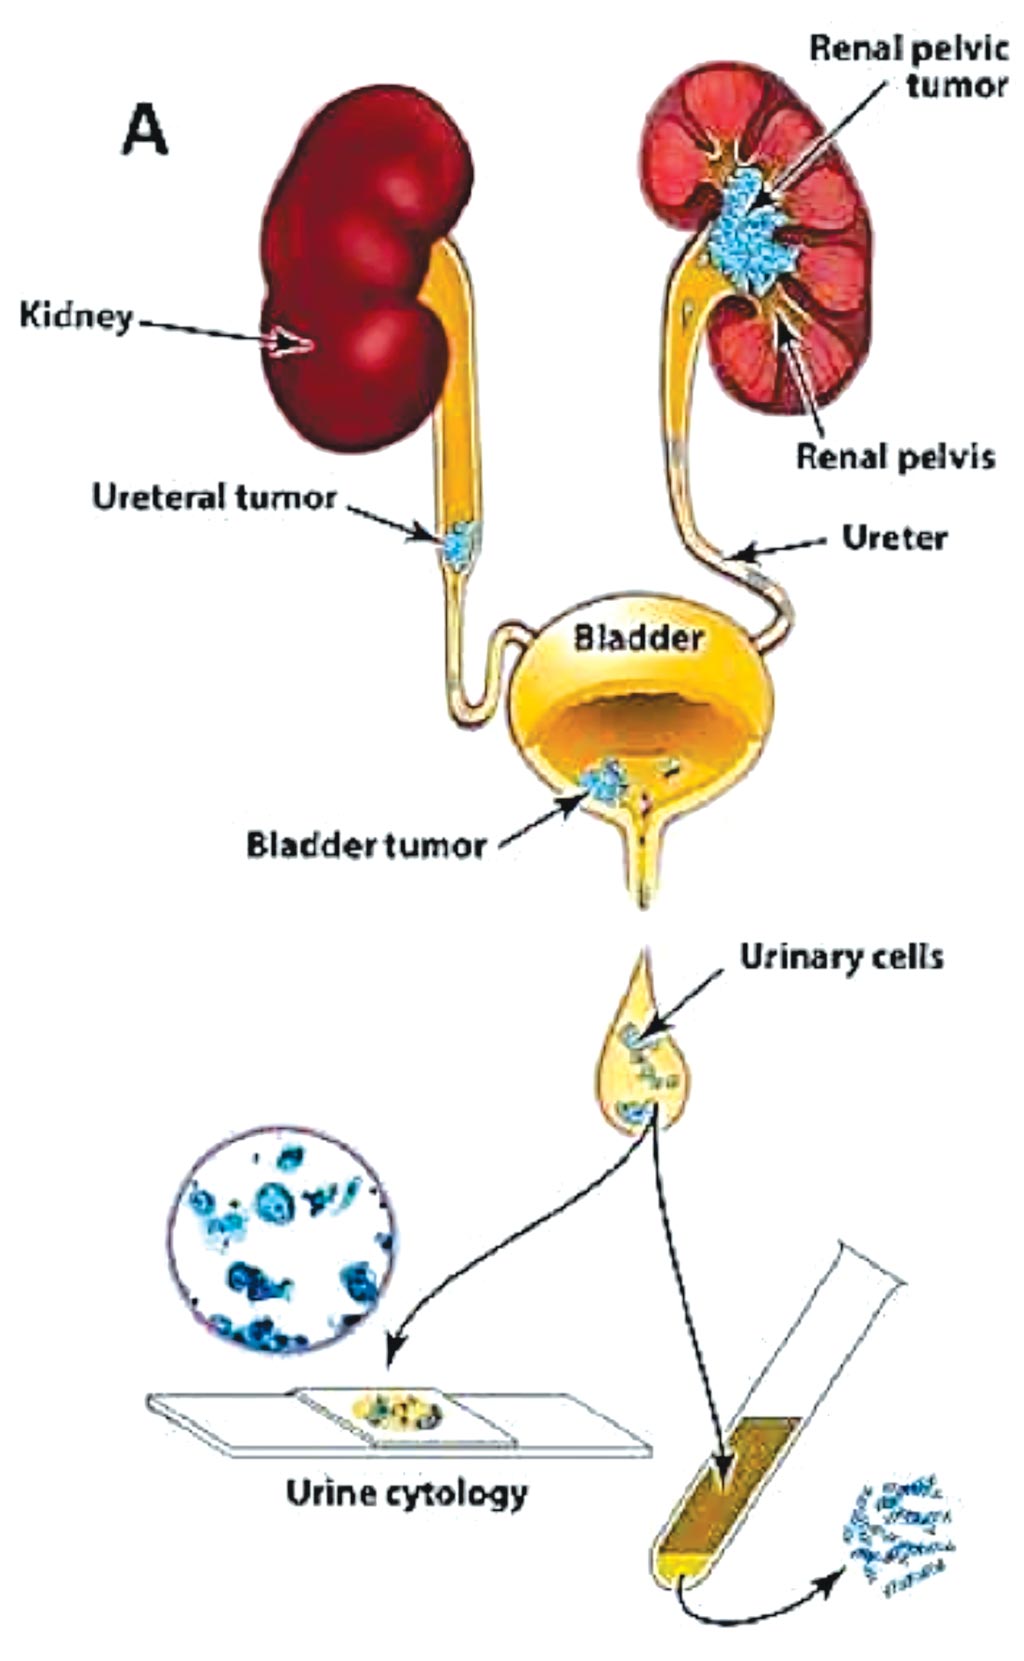 Image: A diagram of the approach used to evaluate urinary cells; UroSEEK assay is designed to detect urothelial neoplasms that are in direct contact with urine (Photo courtesy of Johns Hopkins Medicine).